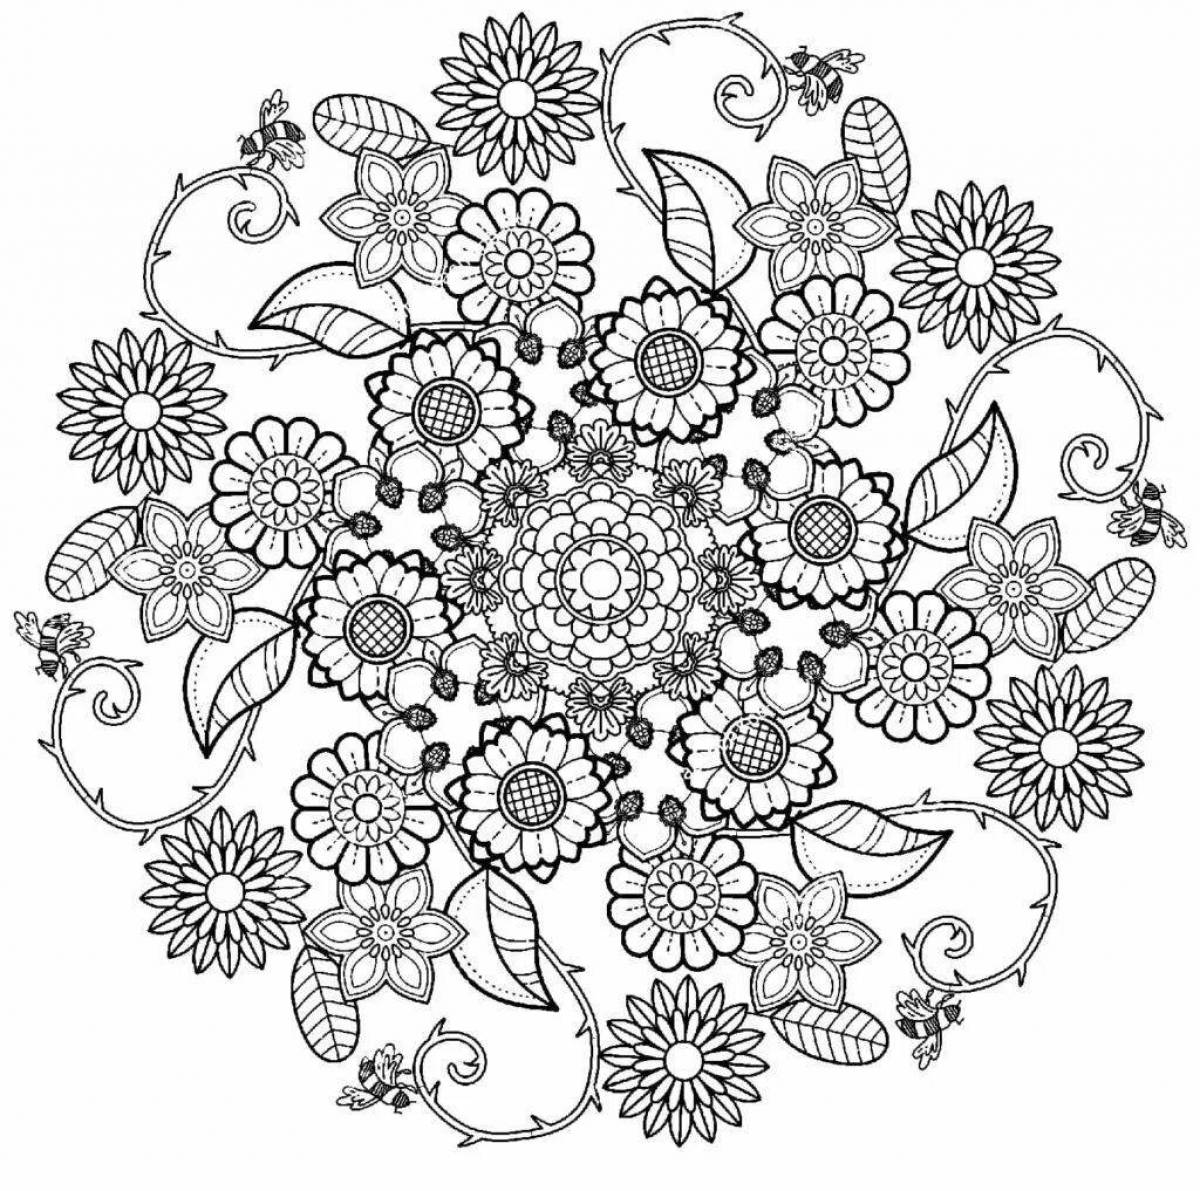 For all adults mandalas #5